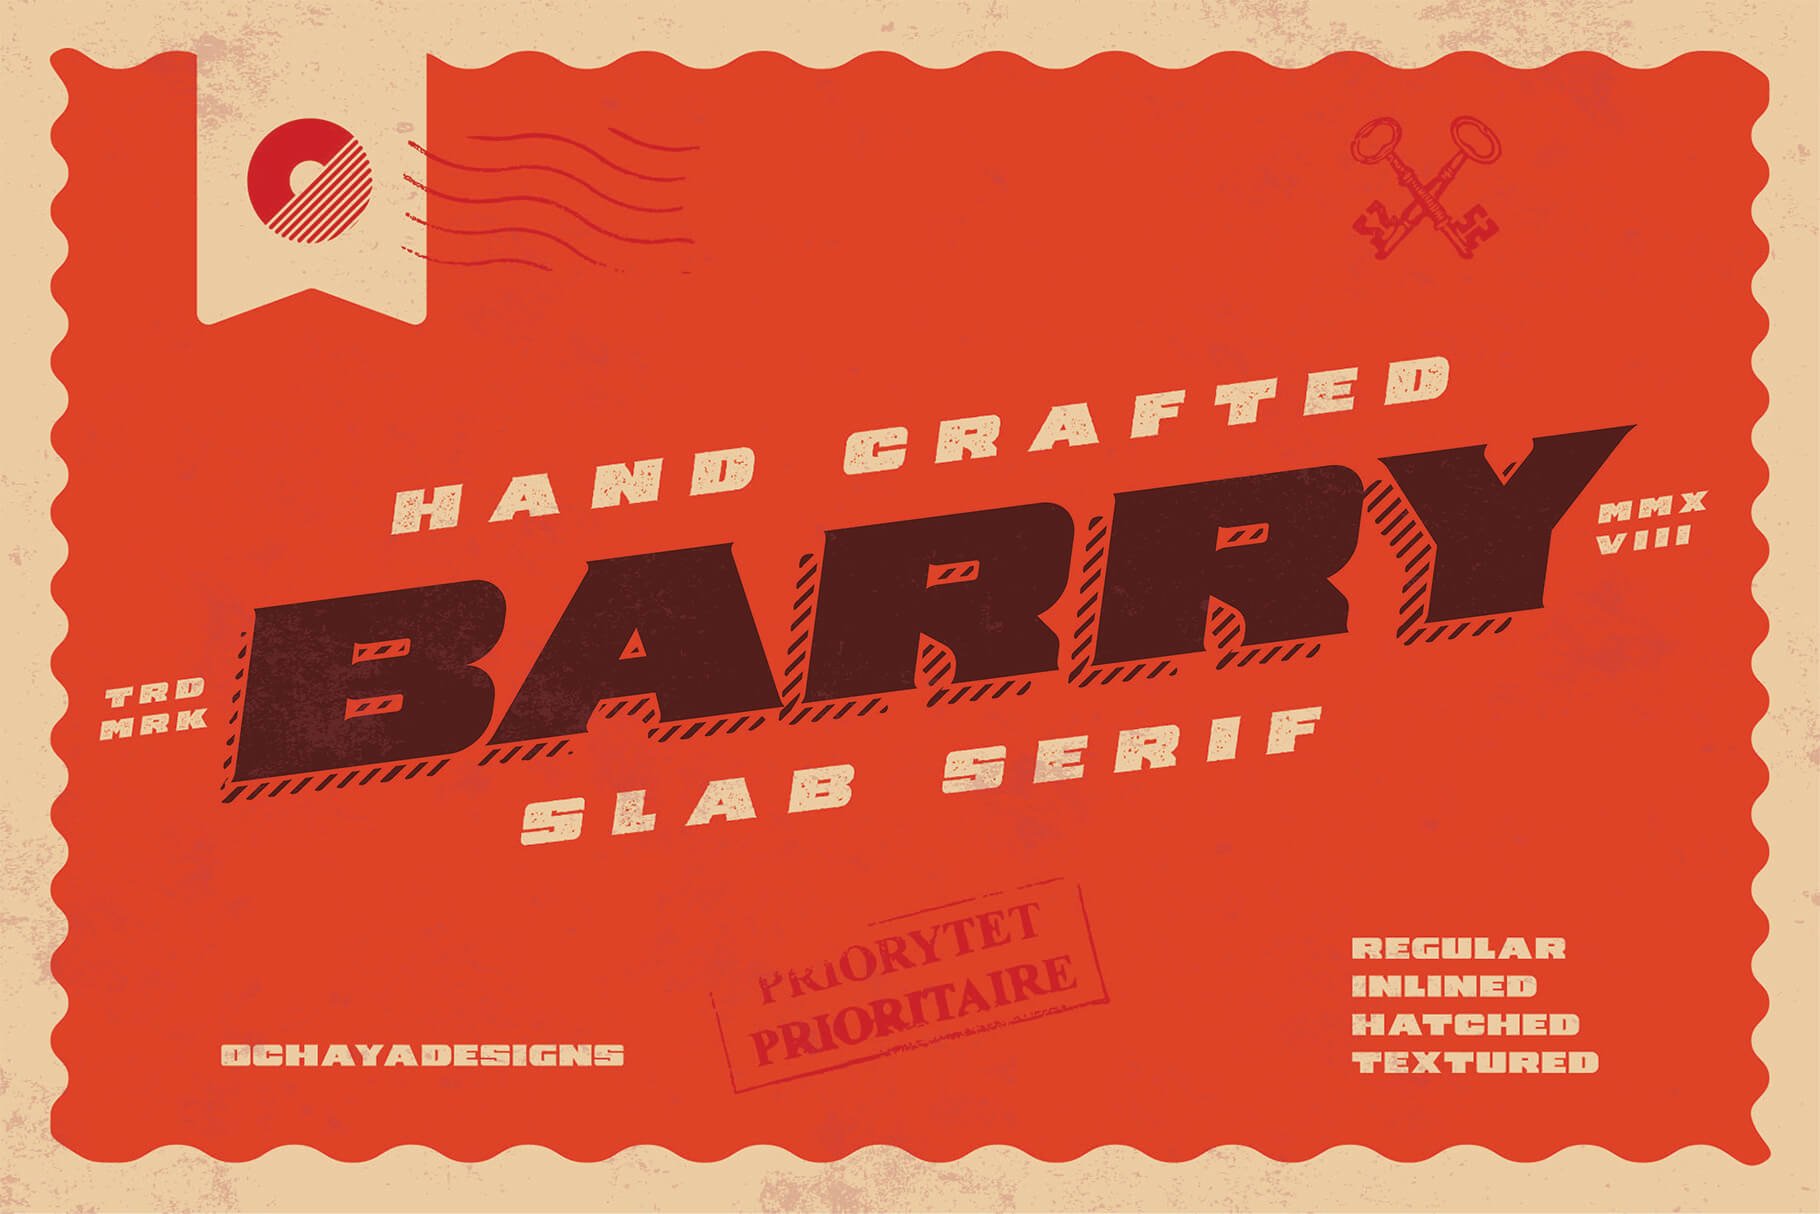 Barry | 4 Font Styles cover image.